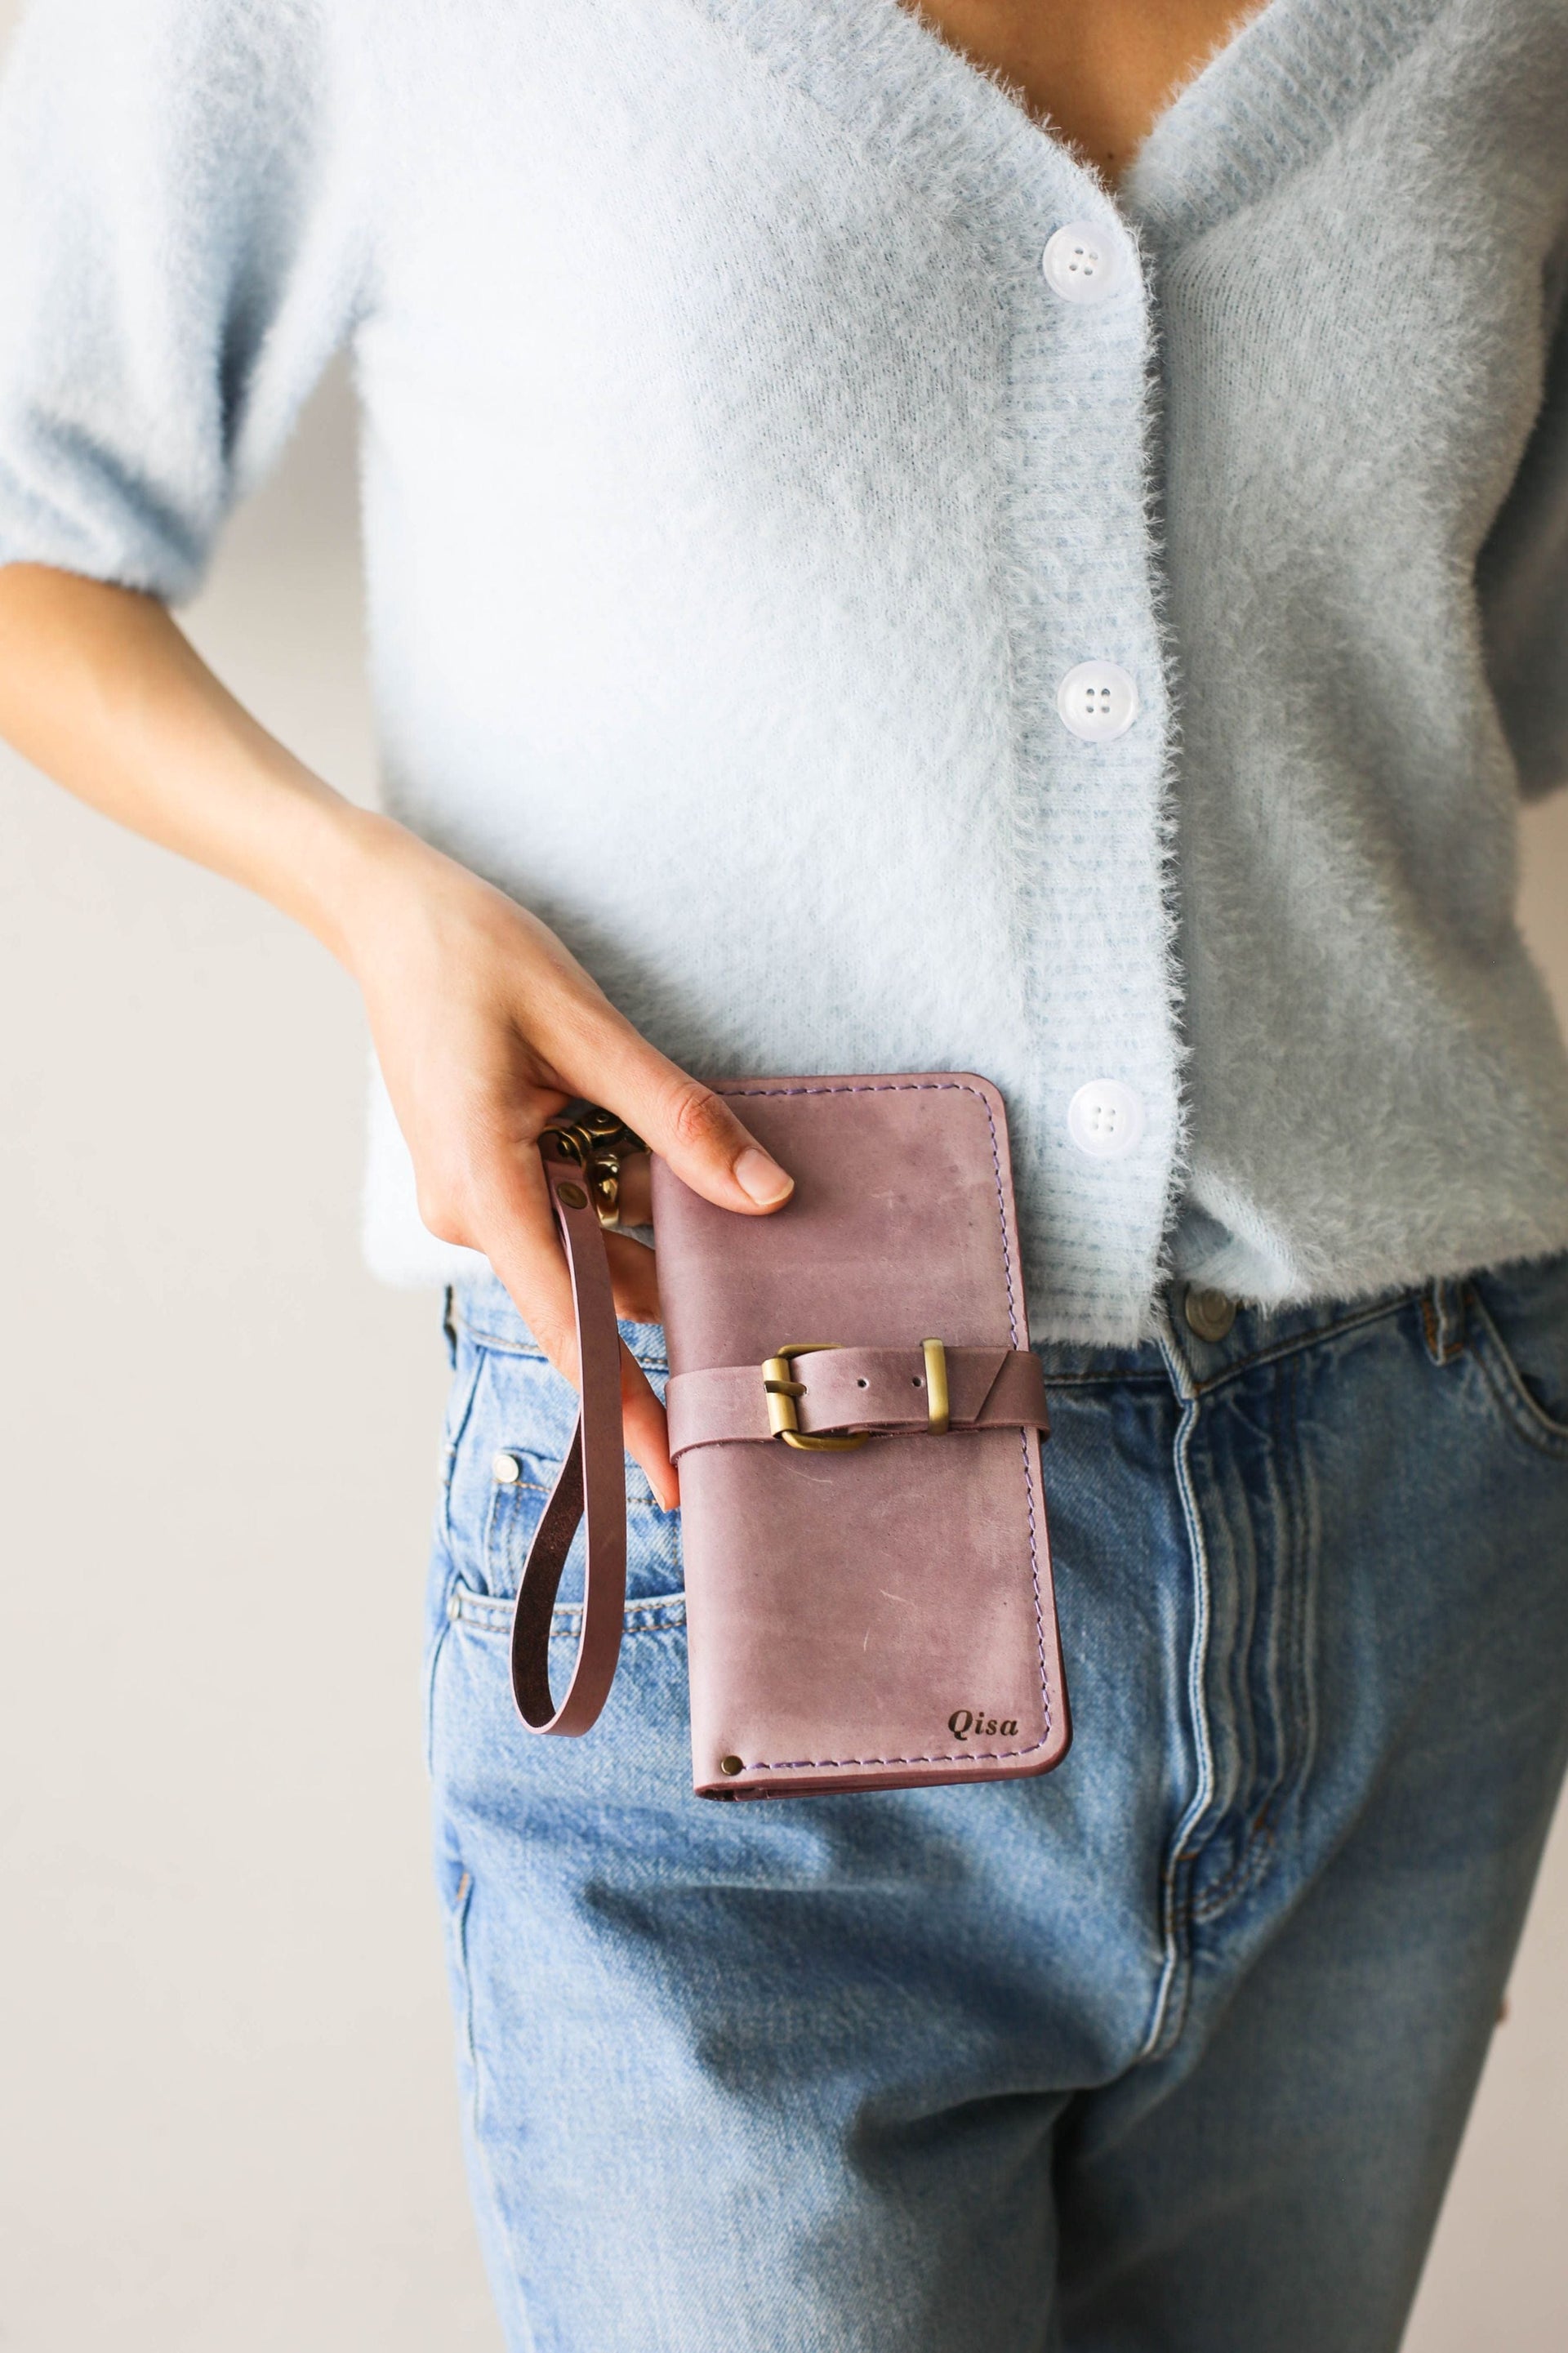 handmade leather wallets for women